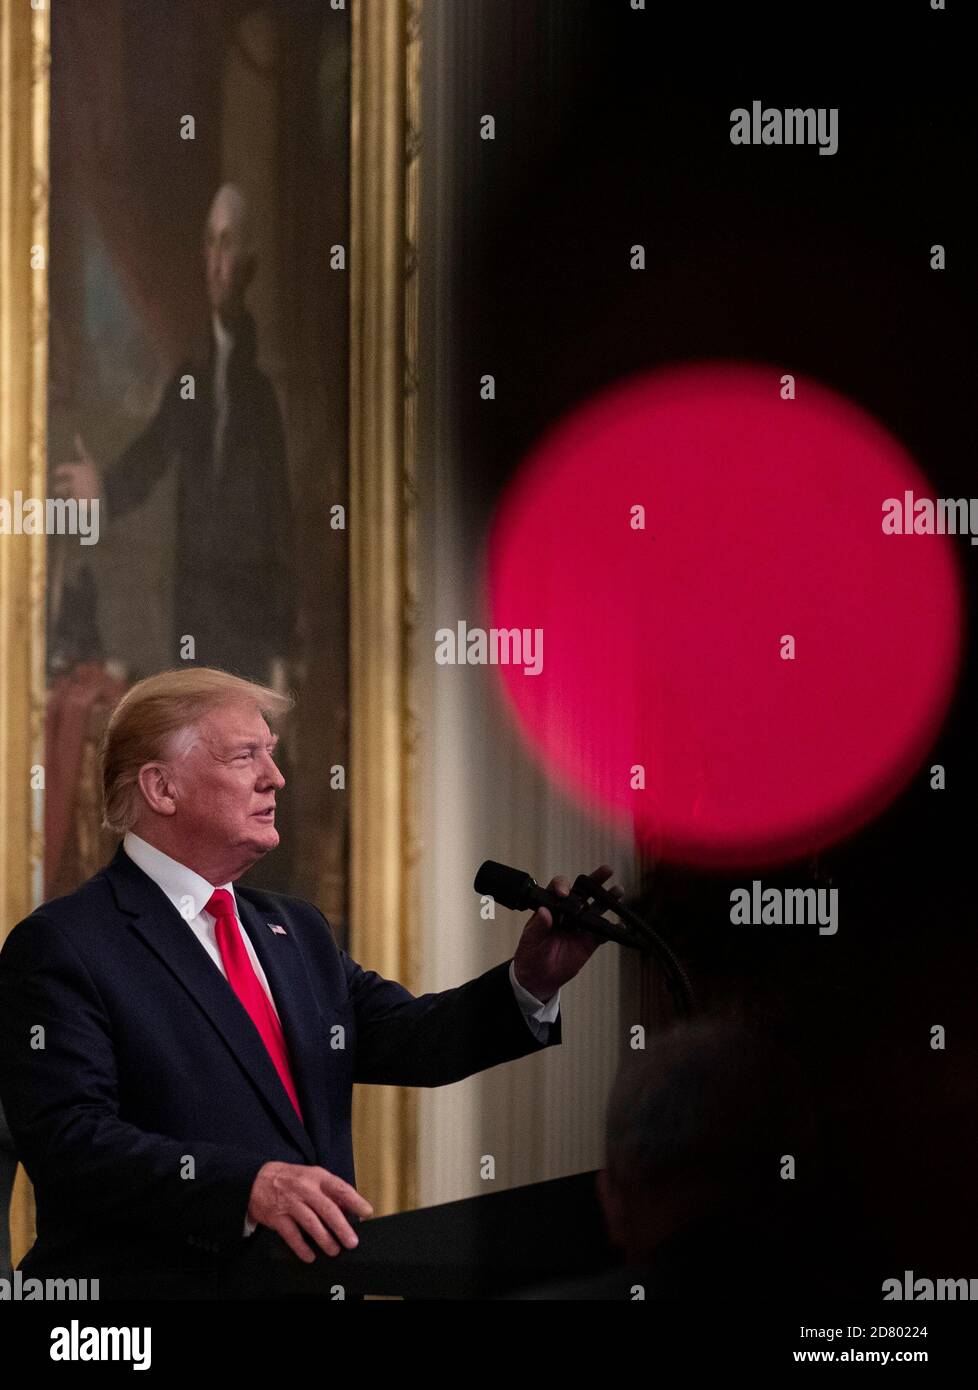 U.S. President Donald Trump delivers remarks in the East Room of the White House in Washington, D.C. on June 13, 2019. Trump spoke about second chance hiring and opportunities to succeed after leaving prison. Credit: Alex Edelman/The Photo Access Stock Photo